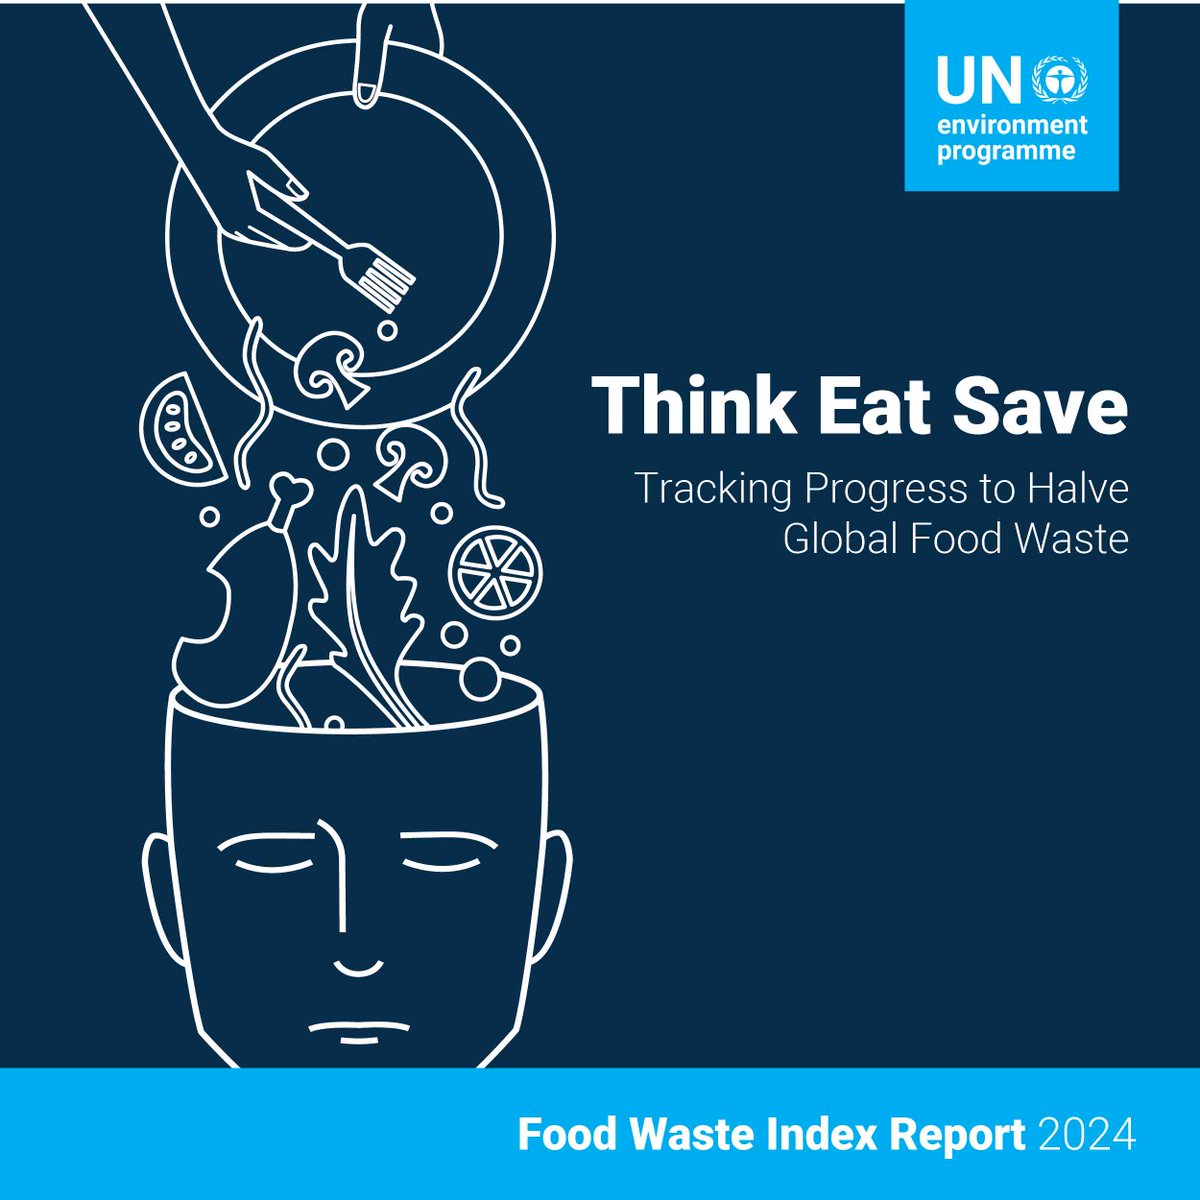 Reducing food waste can help cut greenhouse gas emissions that lead to climate change. Find out about the changes needed at both individual and systemic levels, including national plans, at the 27 launch of the #FoodWasteIndex Report: unep.org/events/online-… #ActNow